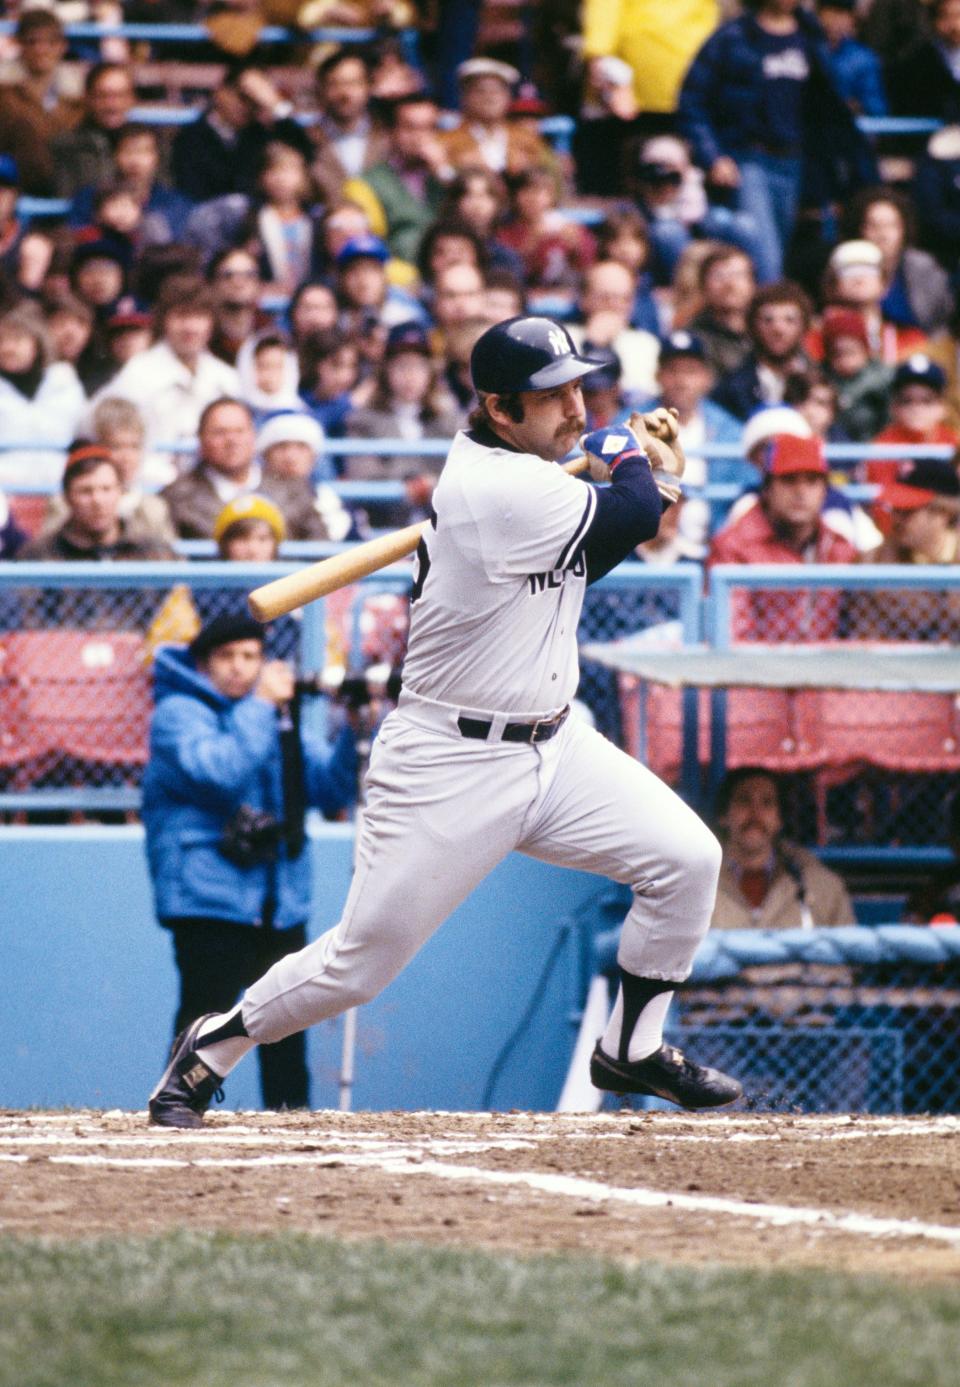 New York Yankees catcher Thurman Munson in action at Cleveland Stadium in an undated photo.